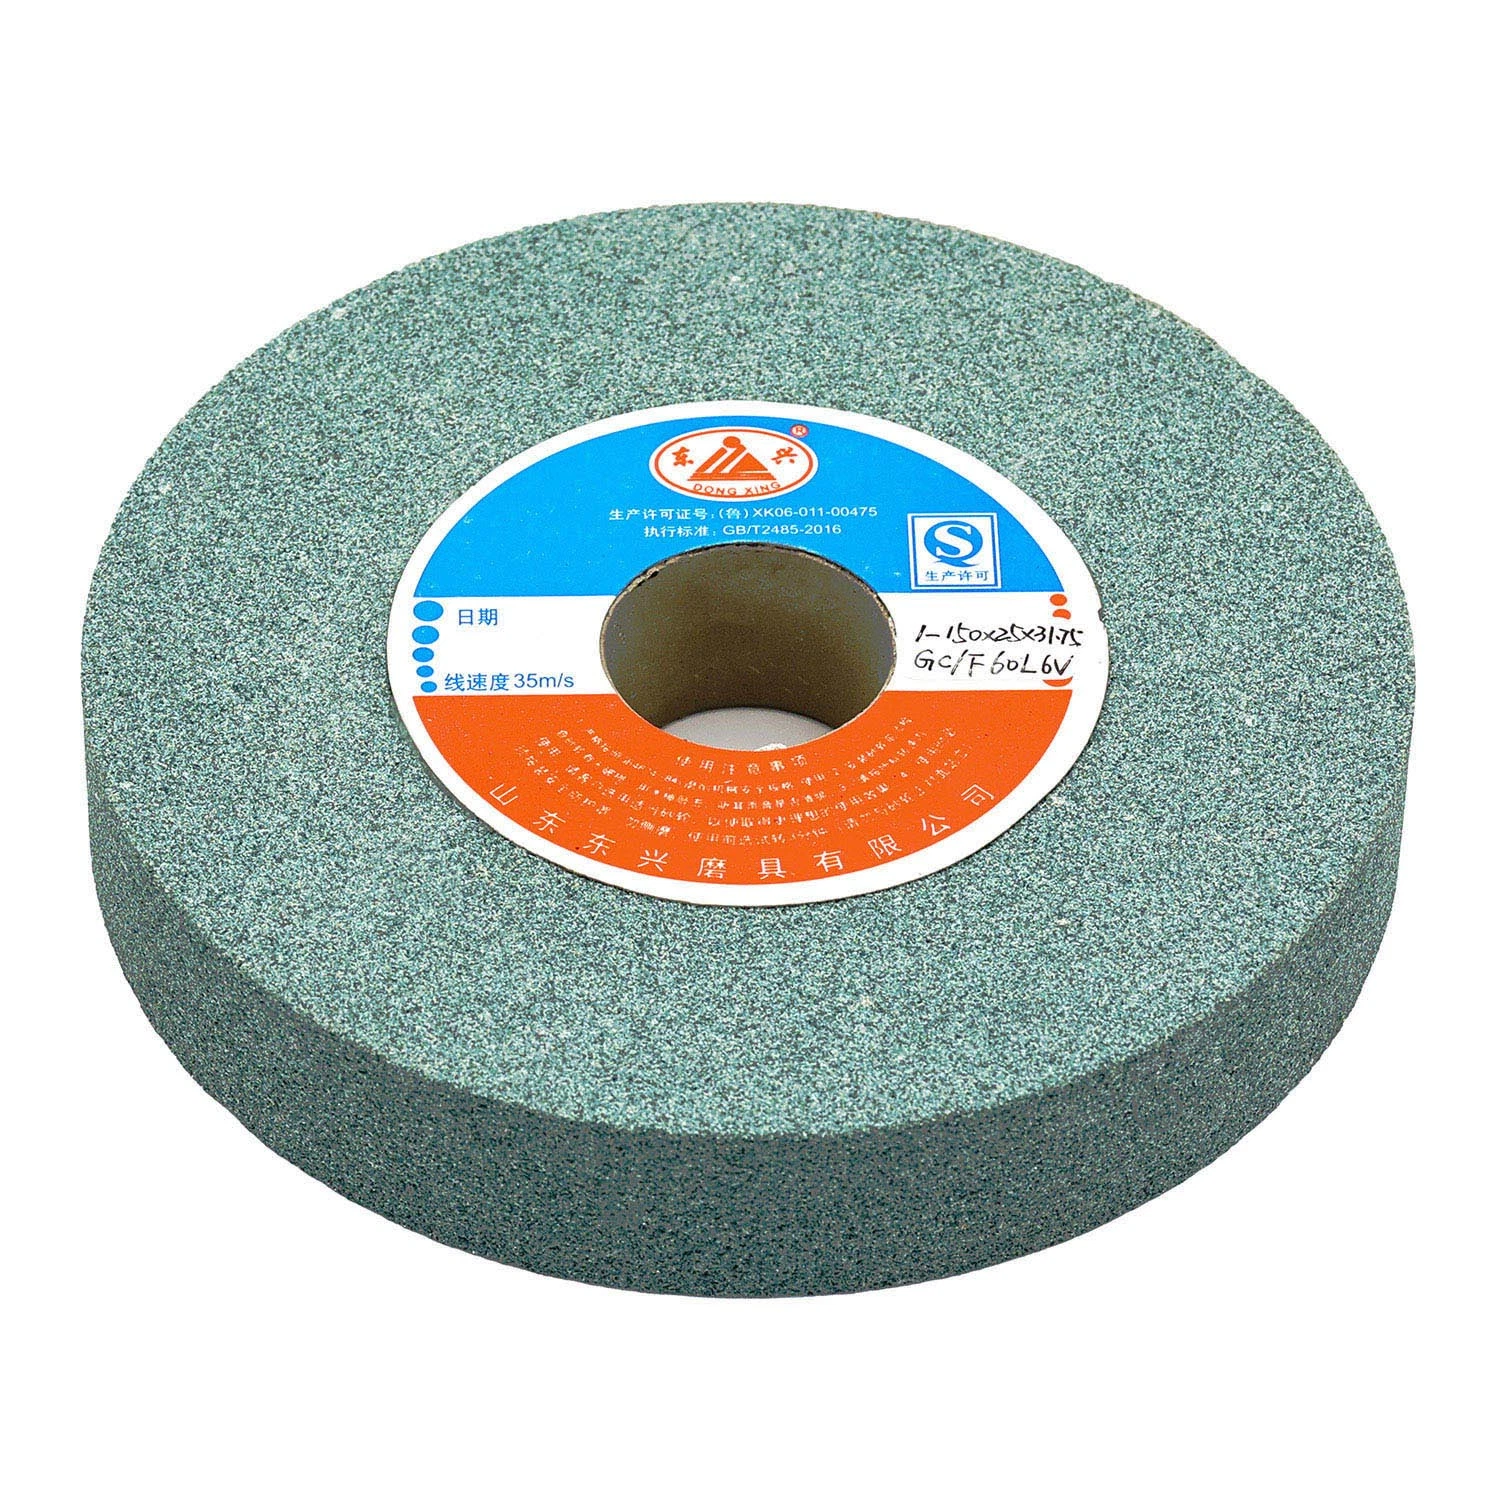 Green Silicon Carbide Abrasive for Grinding and Sharpening Metal